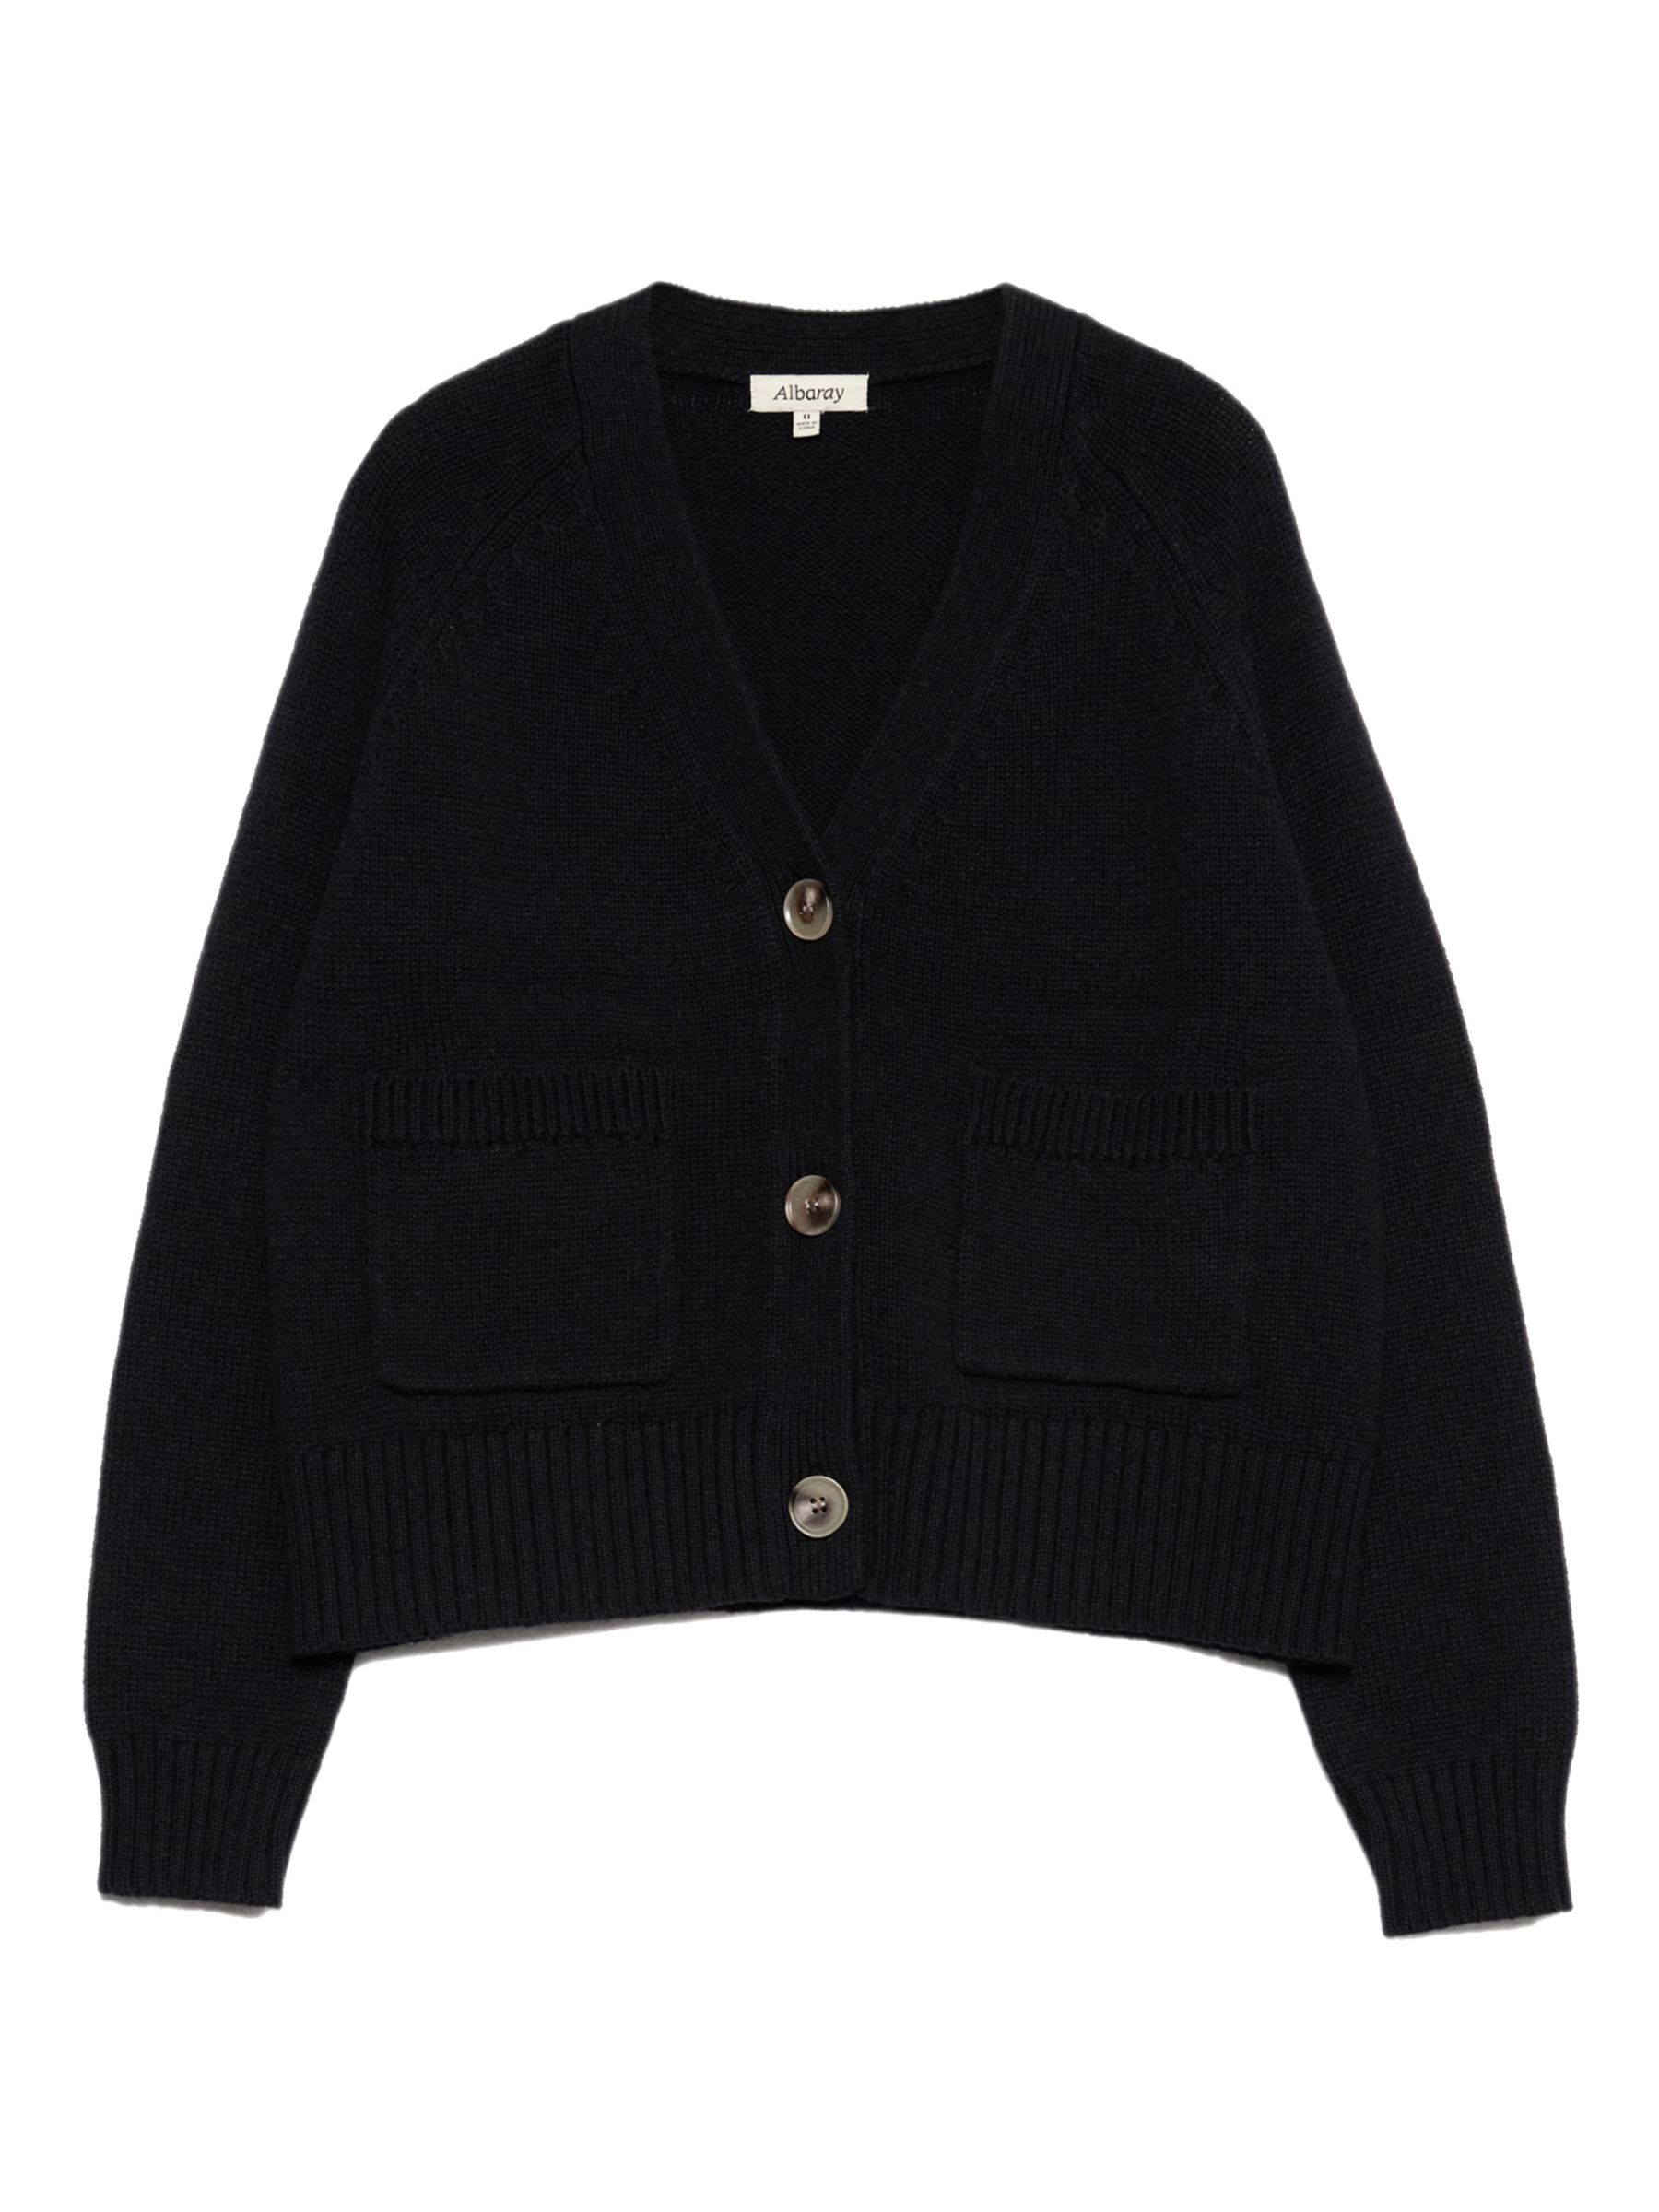 Albaray Relaxed Cotton Cardigan, Black at John Lewis & Partners